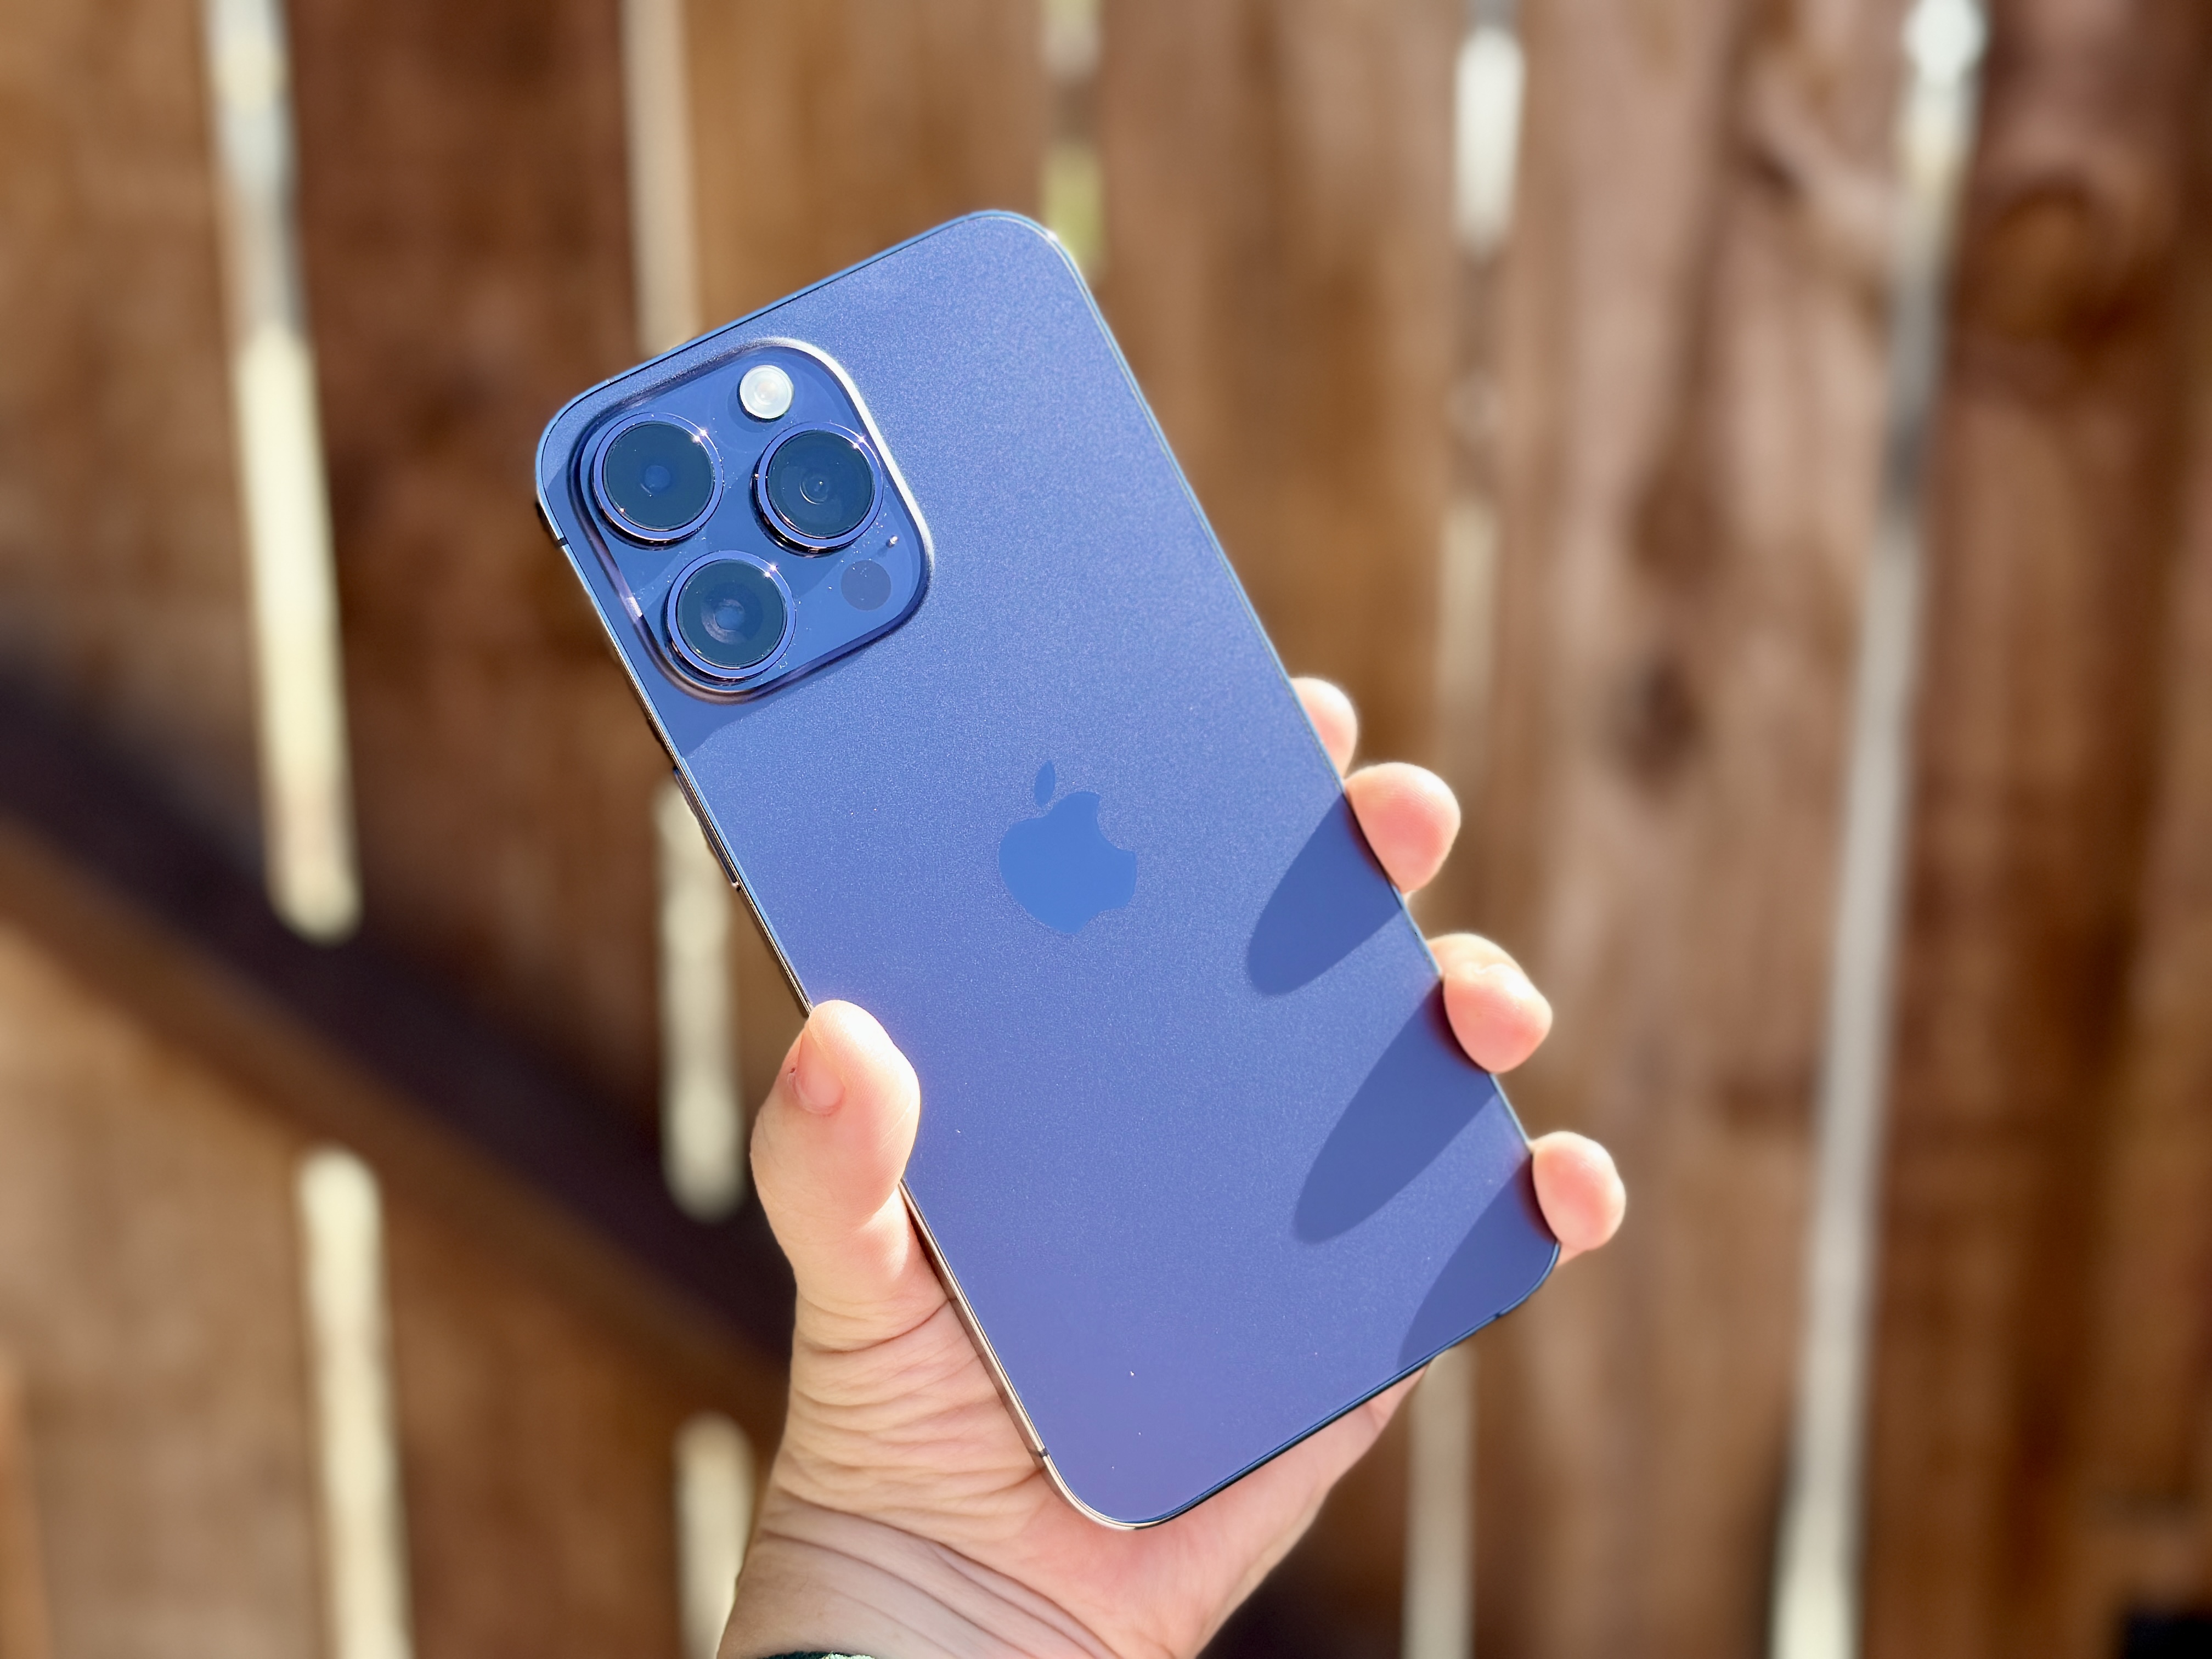 Review of Apple's iPhone 14 and iPhone 14 Pro: They're leaning